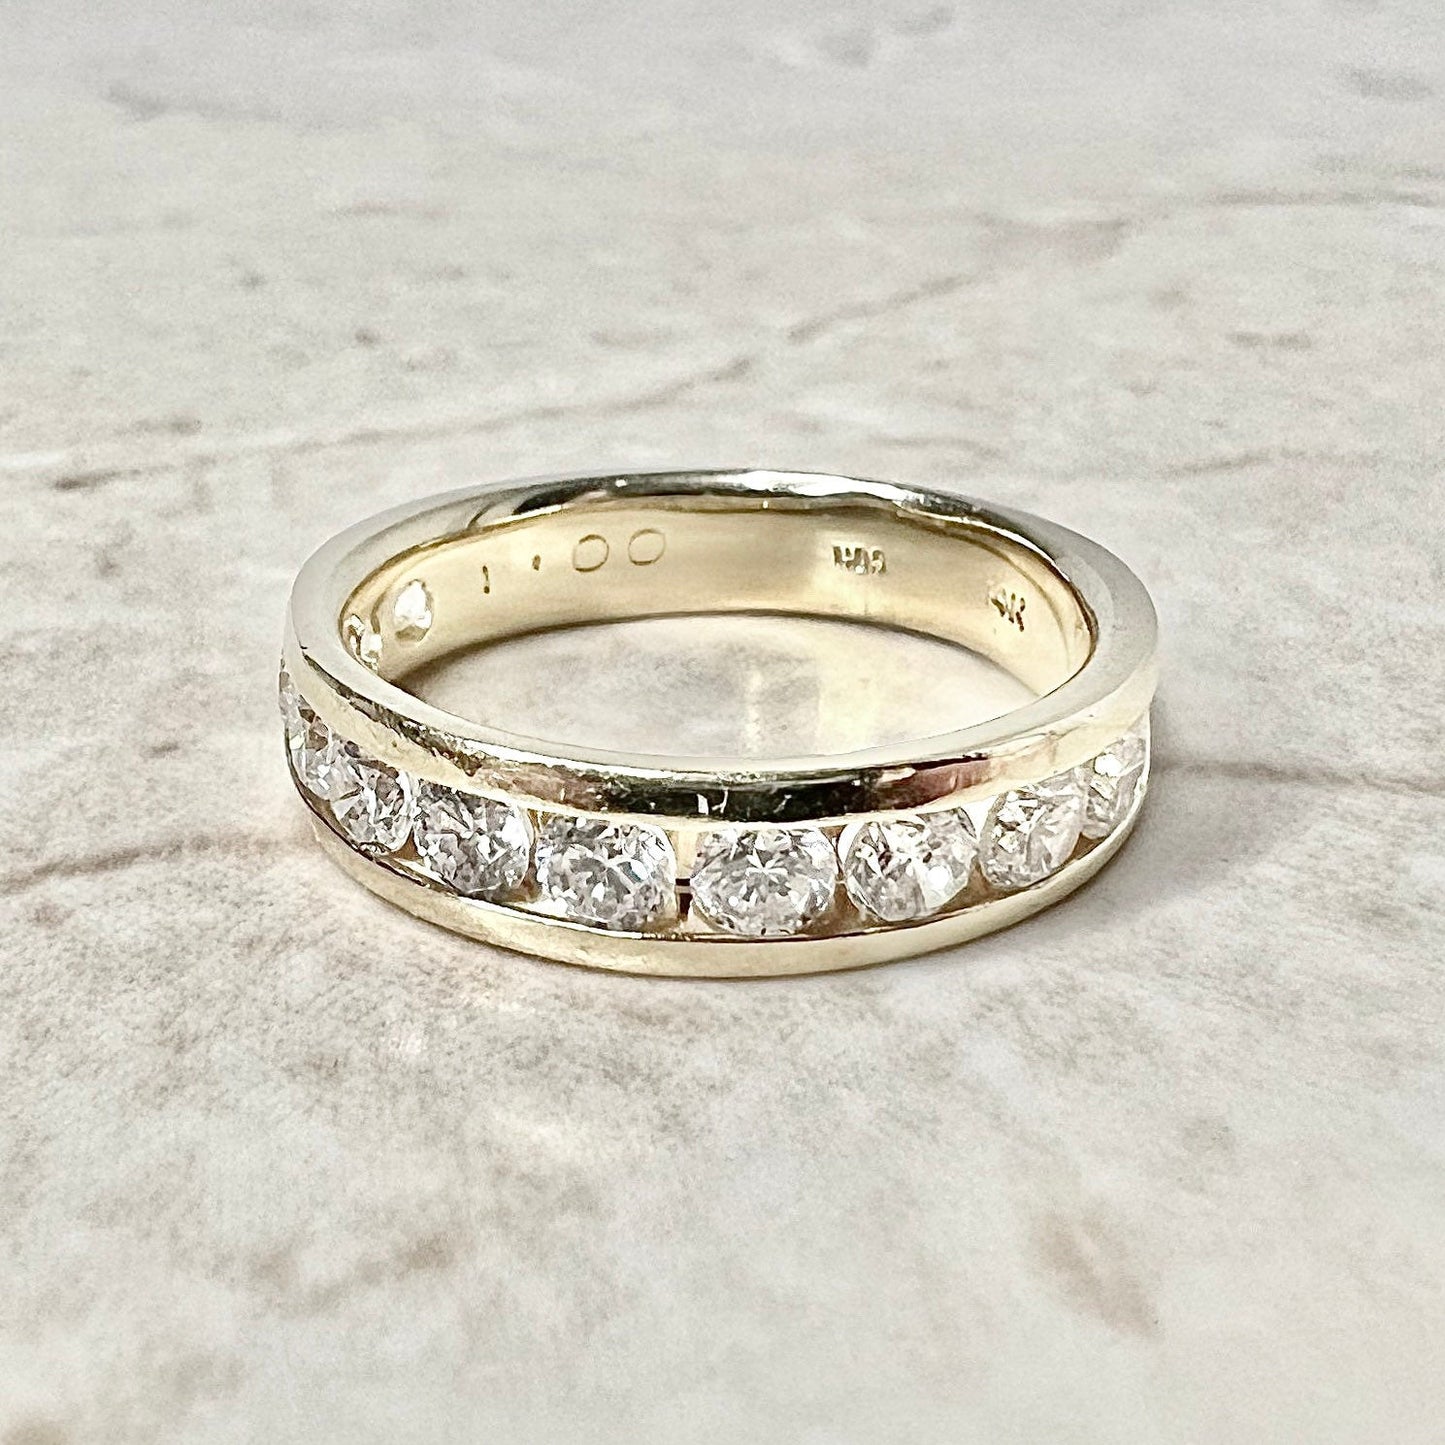 1 CT 14K Half Eternity Diamond Band Ring - Yellow Gold Eternity Ring - Diamond Ring -Anniversary Ring - Wedding Ring - Best Gift For Her